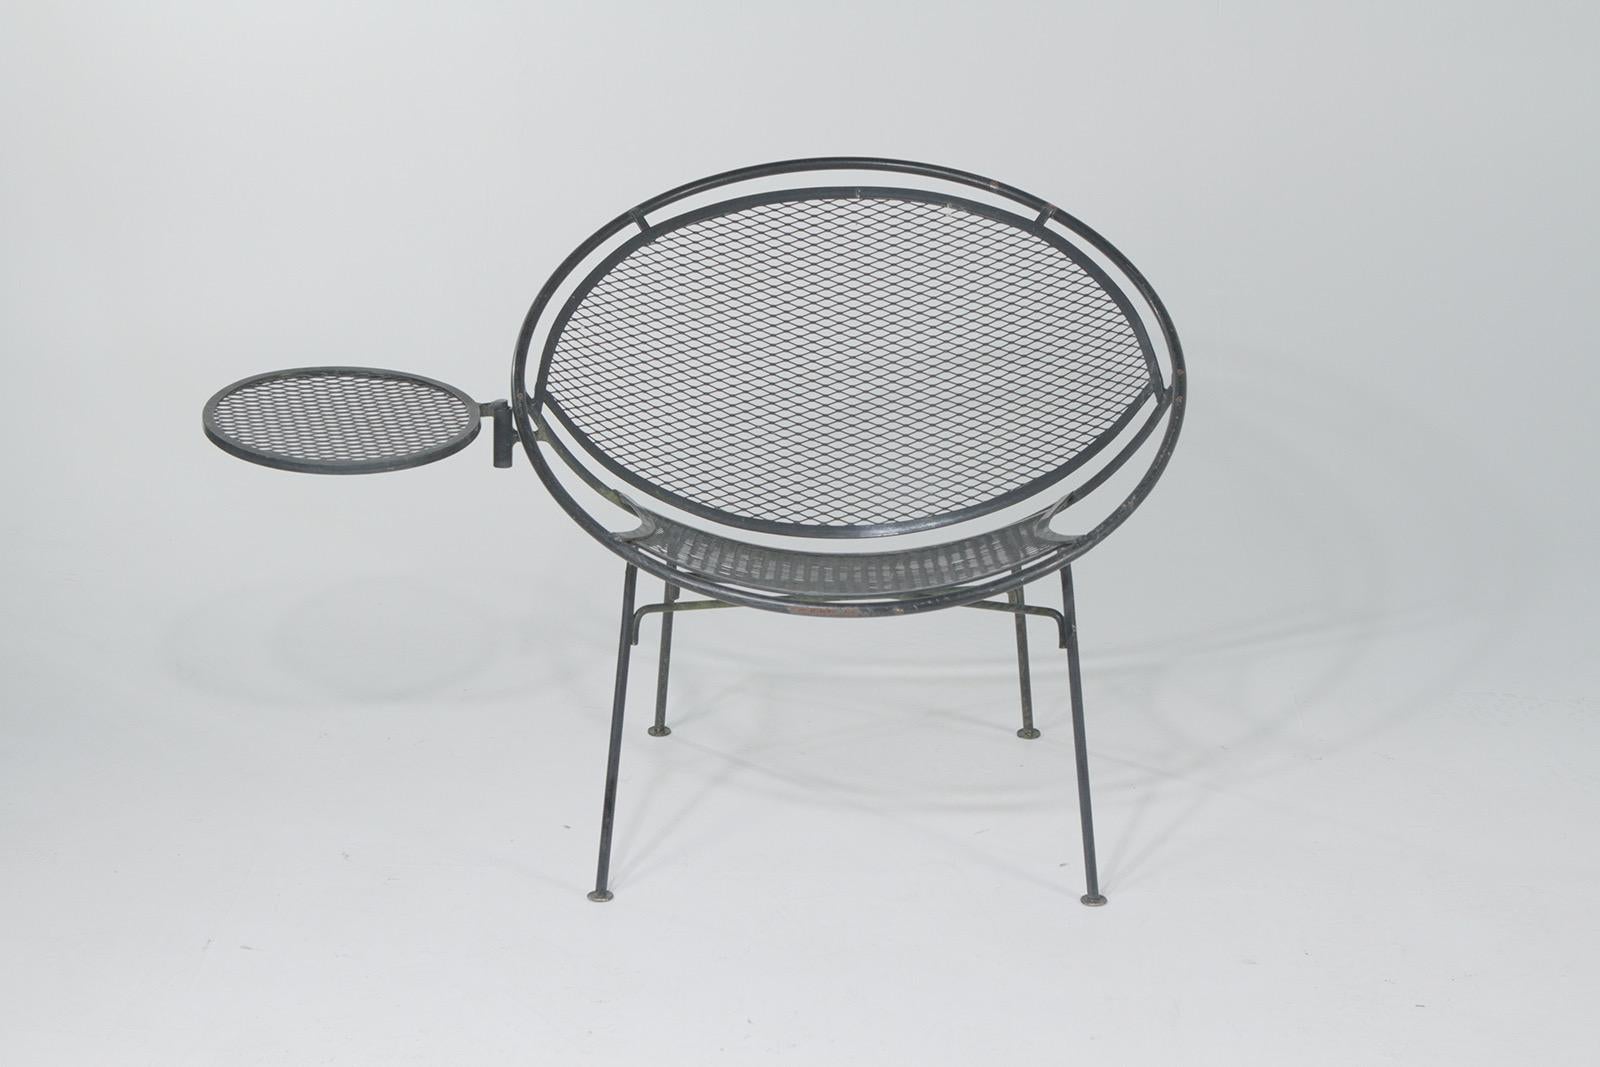 Stylishly shaped Mid-Century Modern wrought iron garden chairs by John Salterini having a 12 inch round cool drinks table that attaches to either chair.